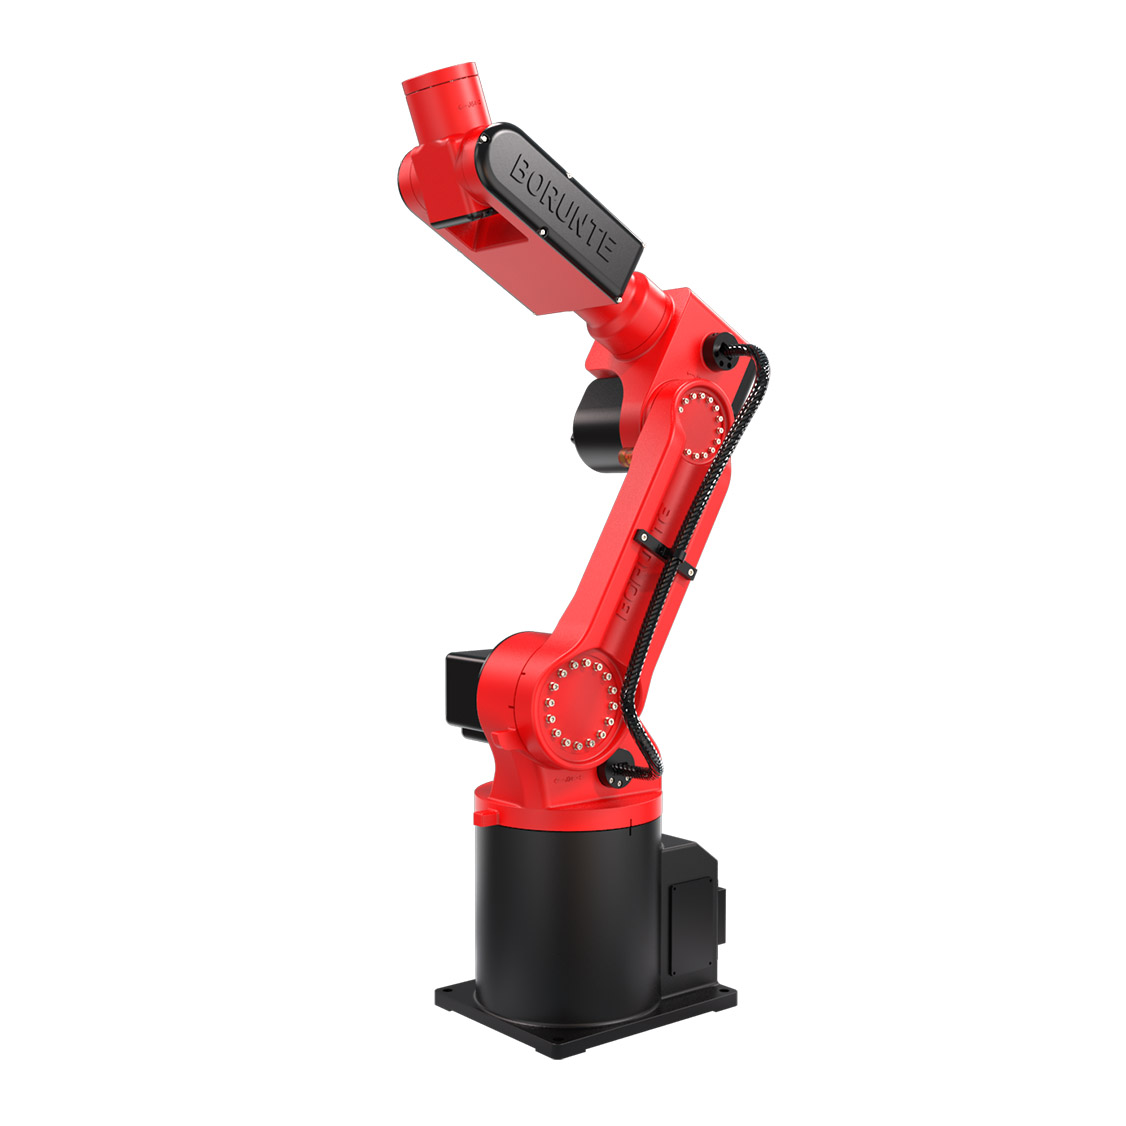 BR0805A 6 Axis Industrial Robots Arm For Welding Cutting Handling